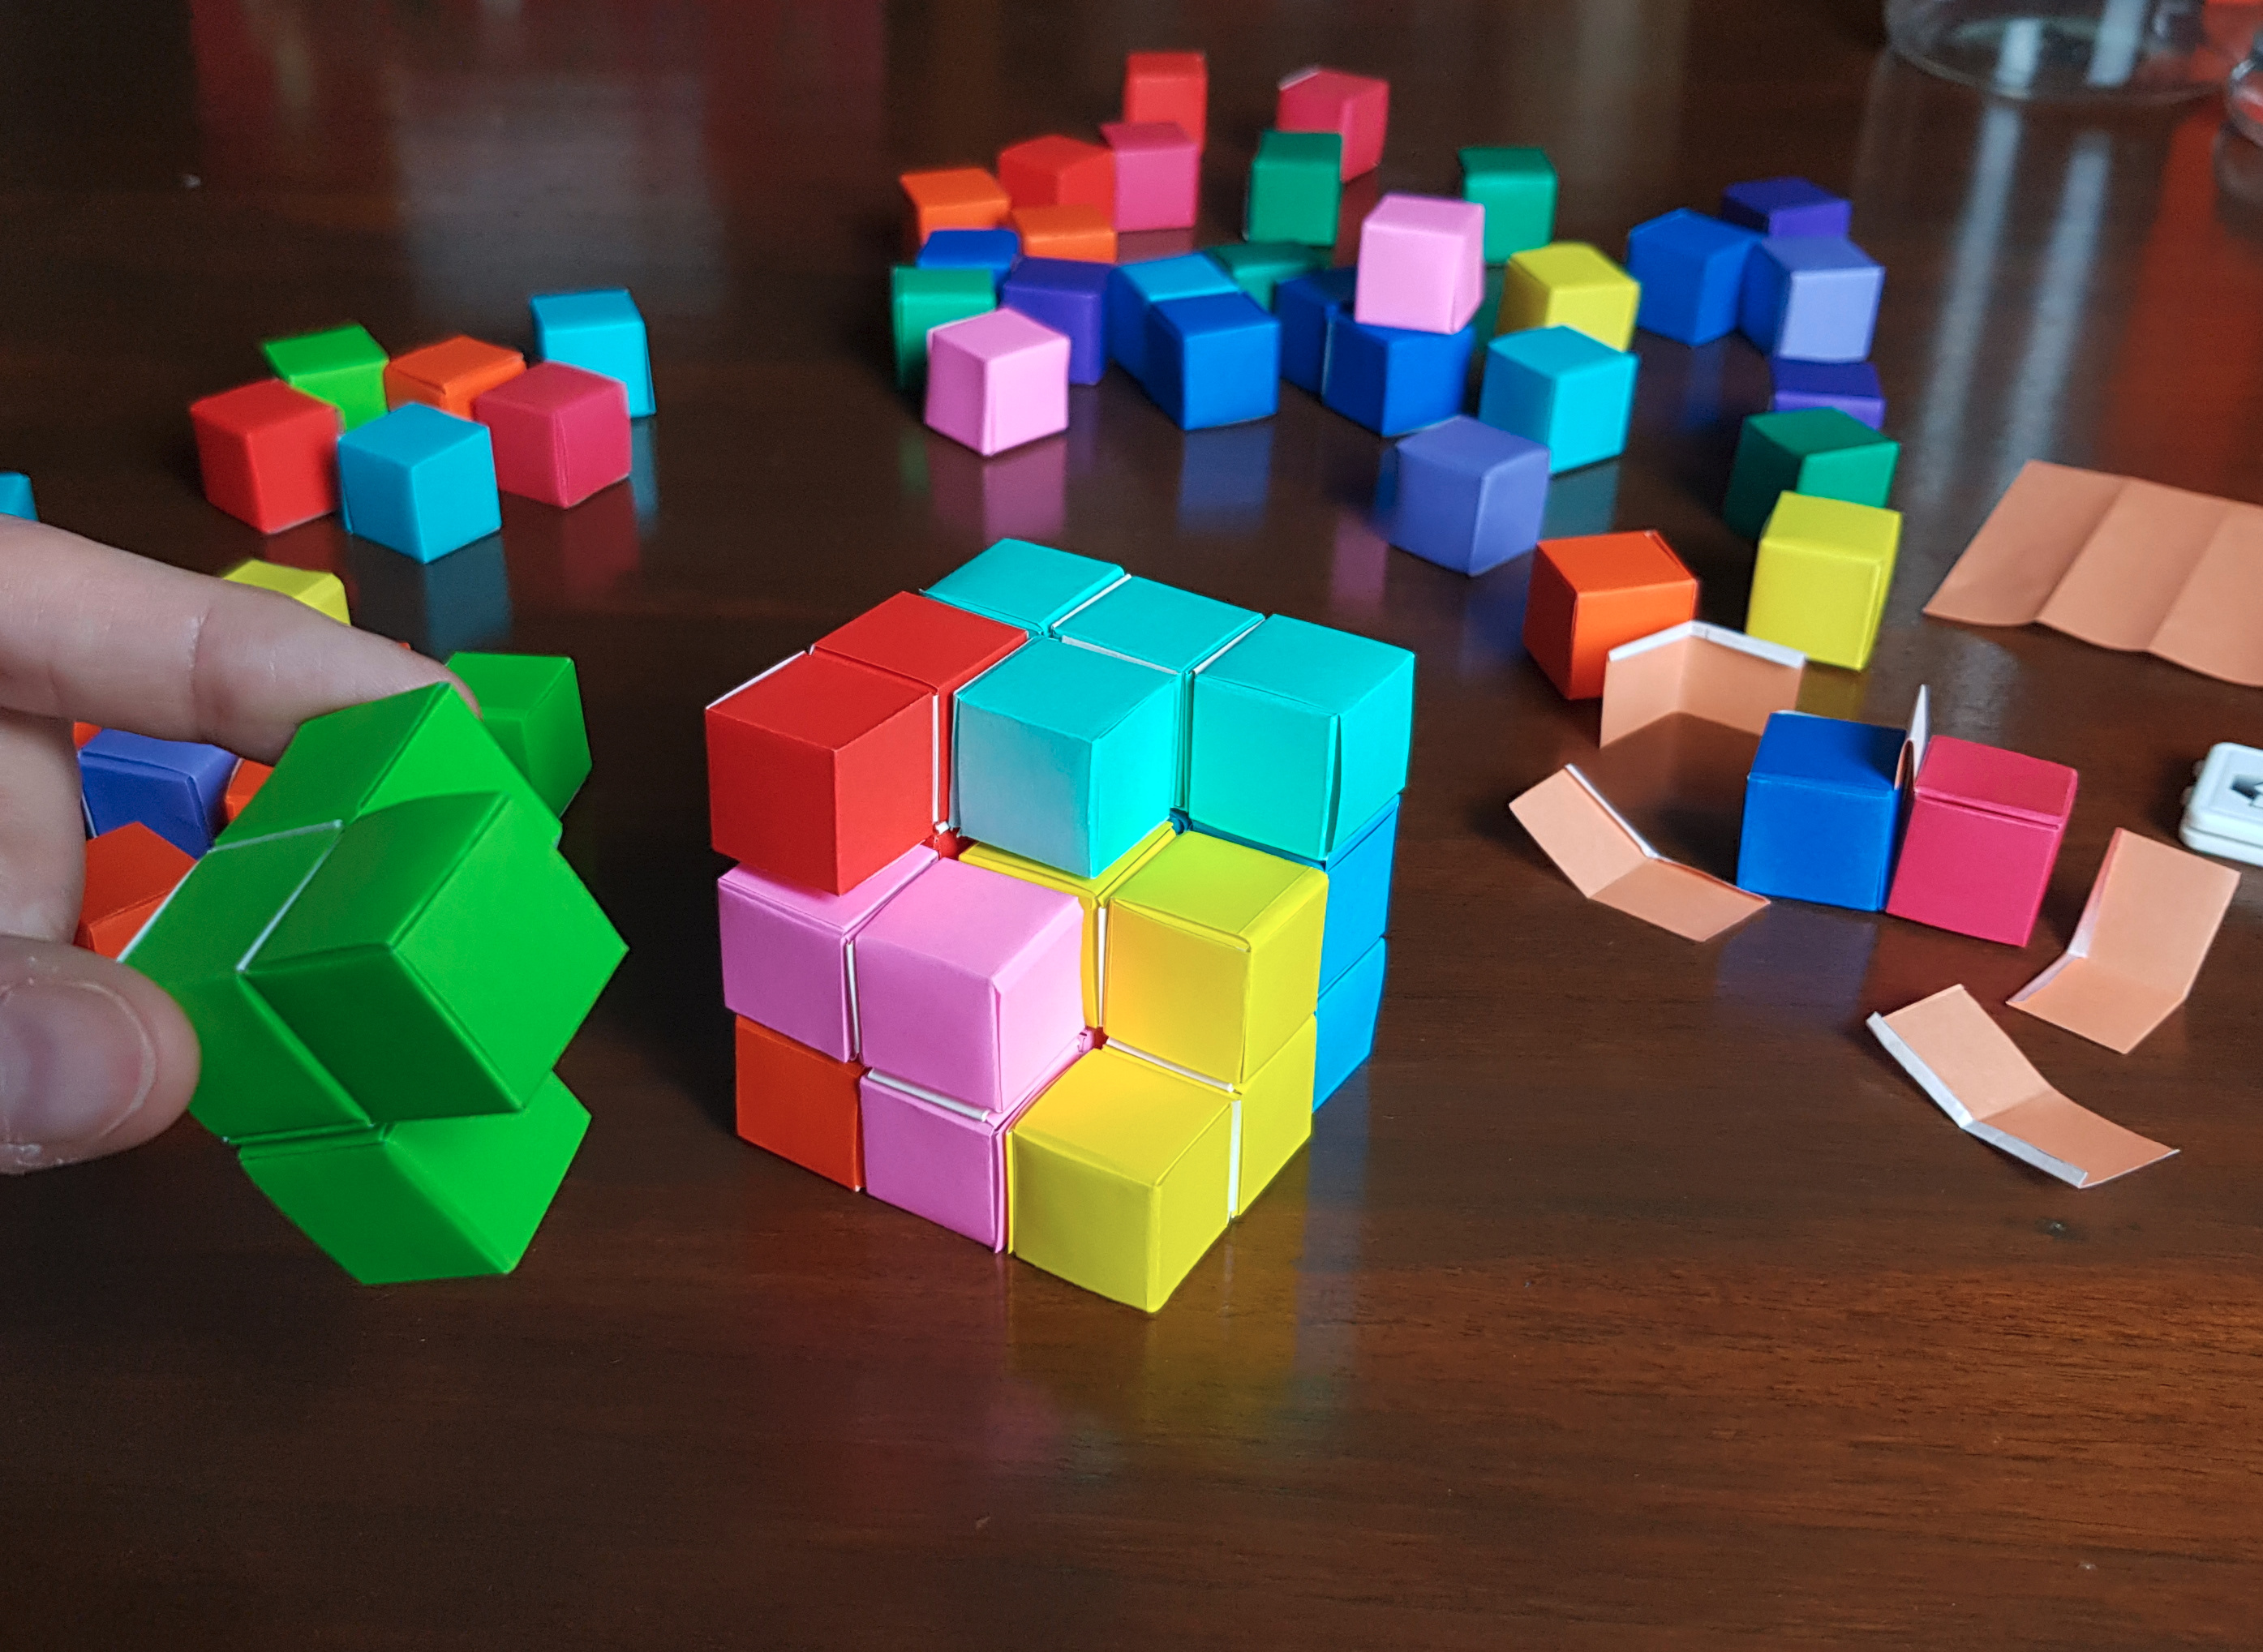 Origami Plus - Stéphane Gigandet on X: A Soma cube puzzle made with my new  origami cubes. It could be a cool project to make with students. Please  share with teachers you